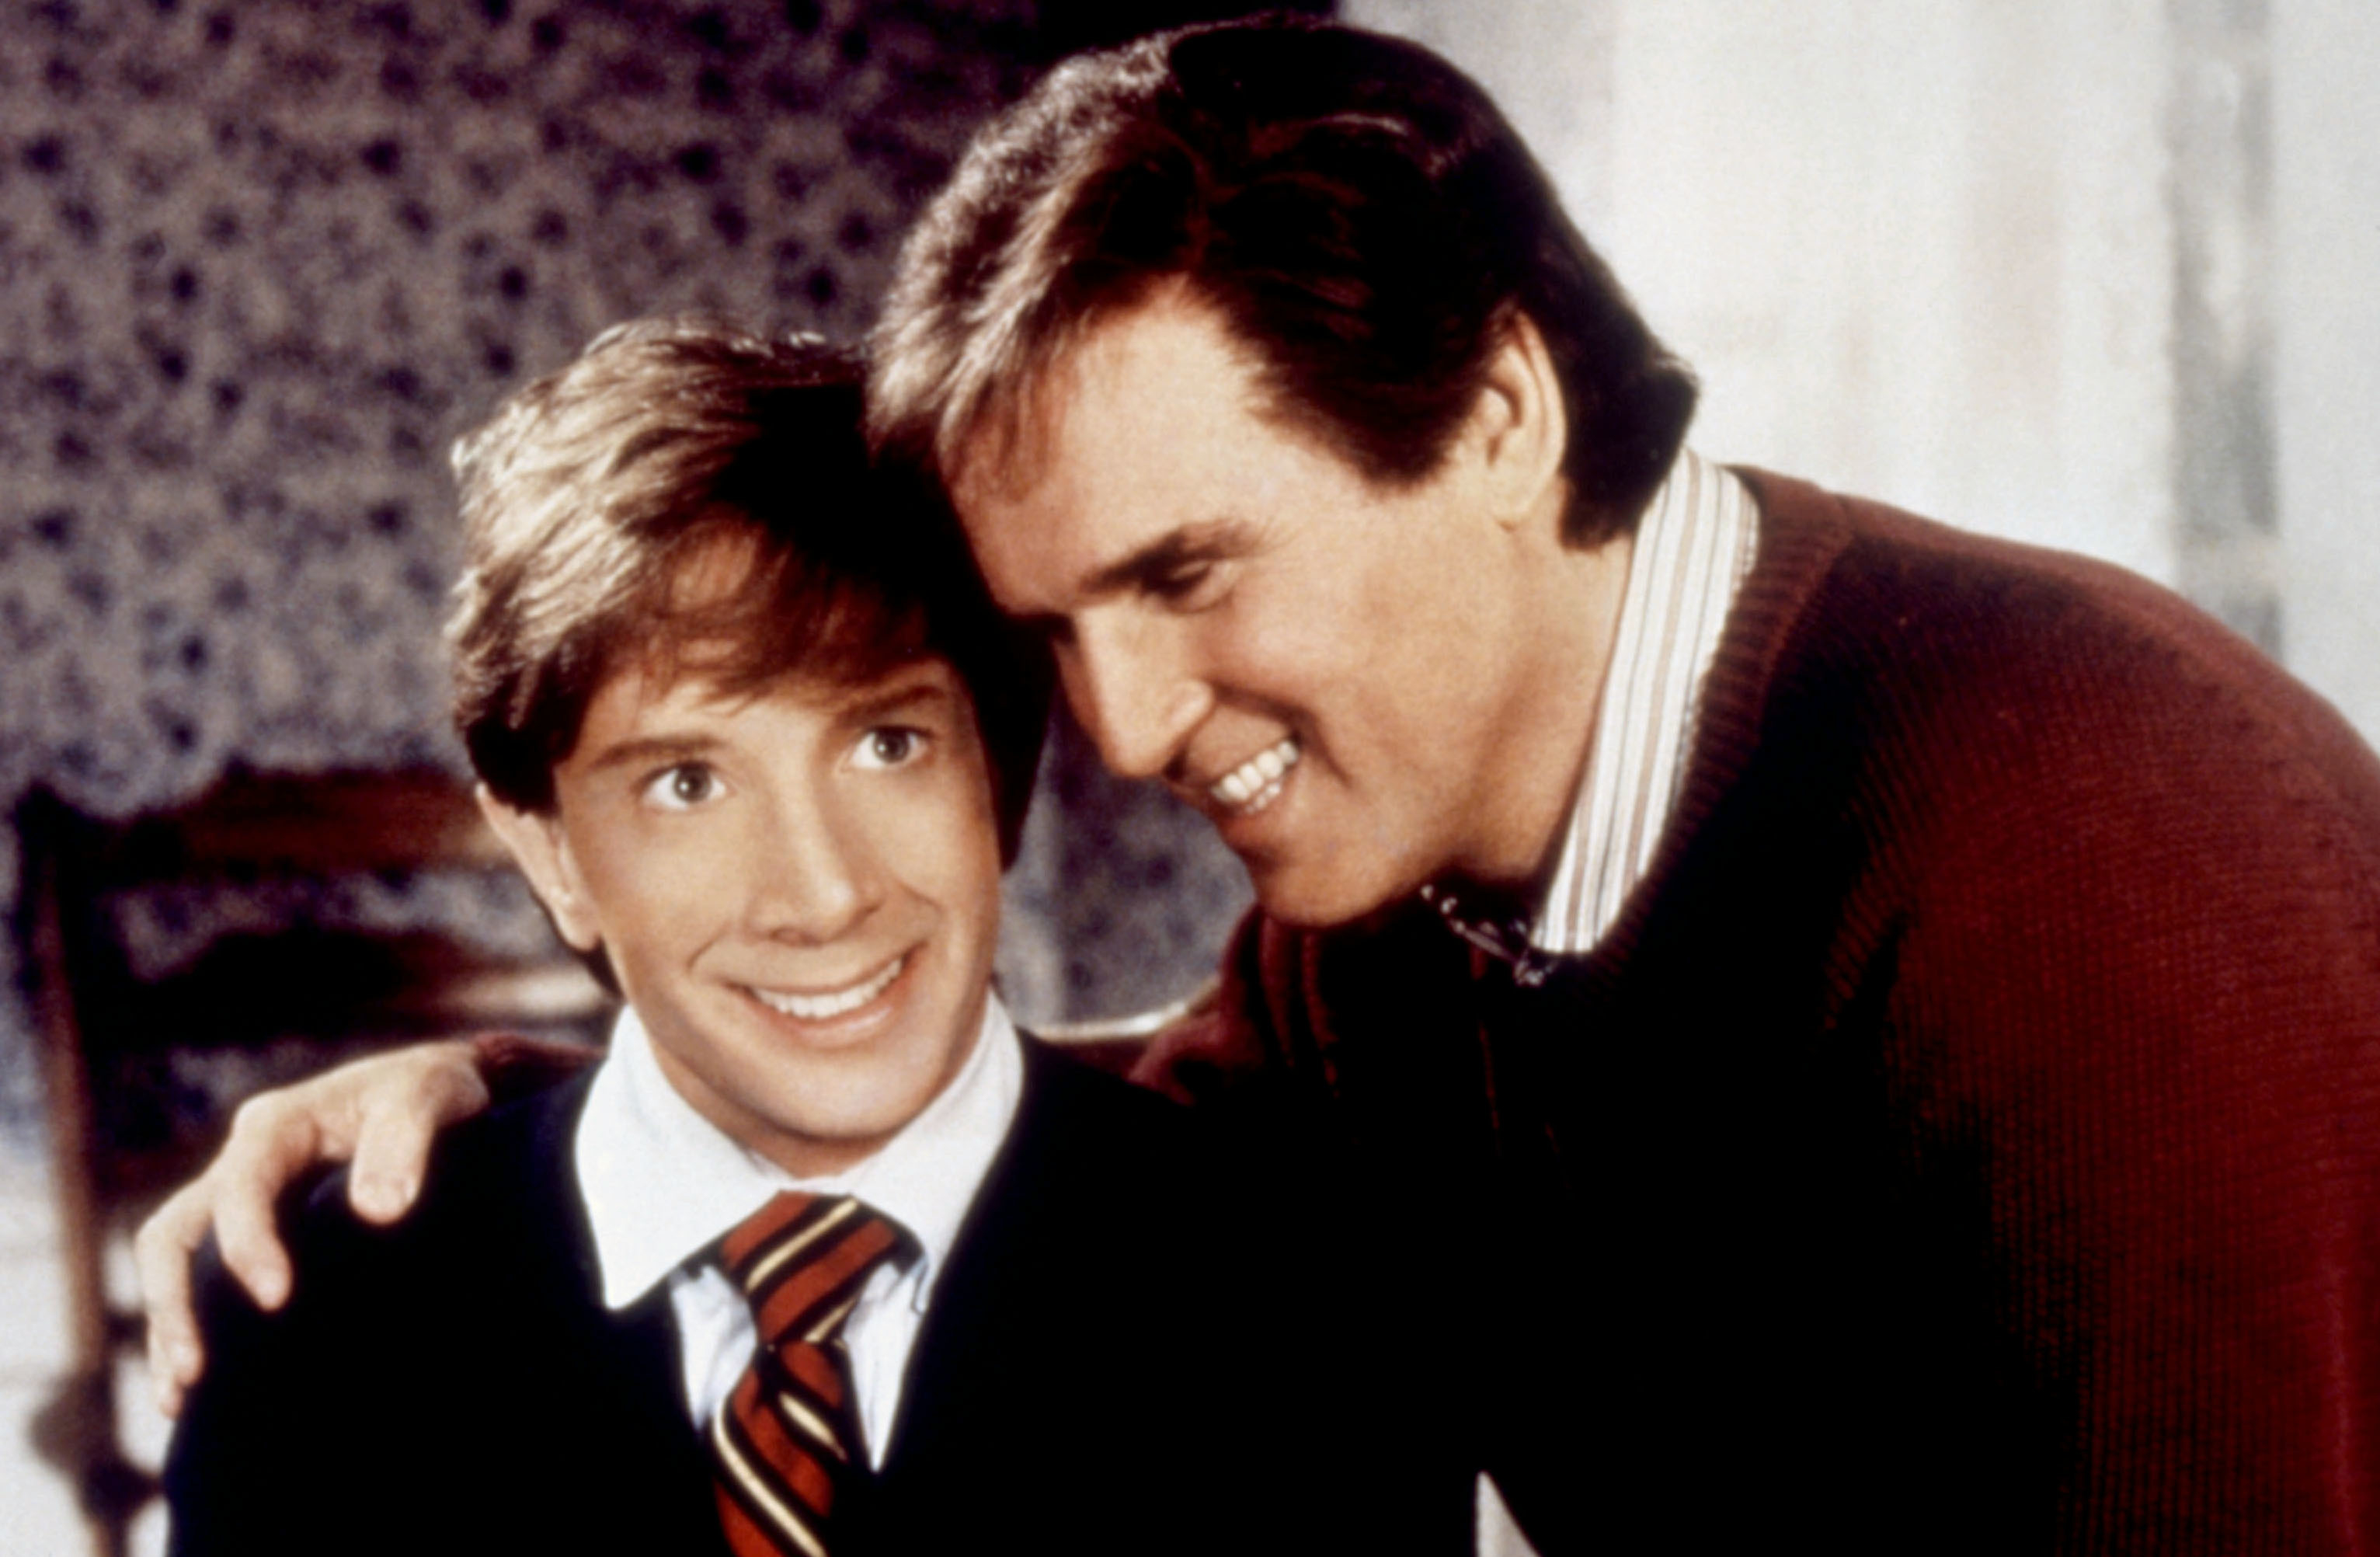 Martin Short and Charles Grodin in a scene from the film